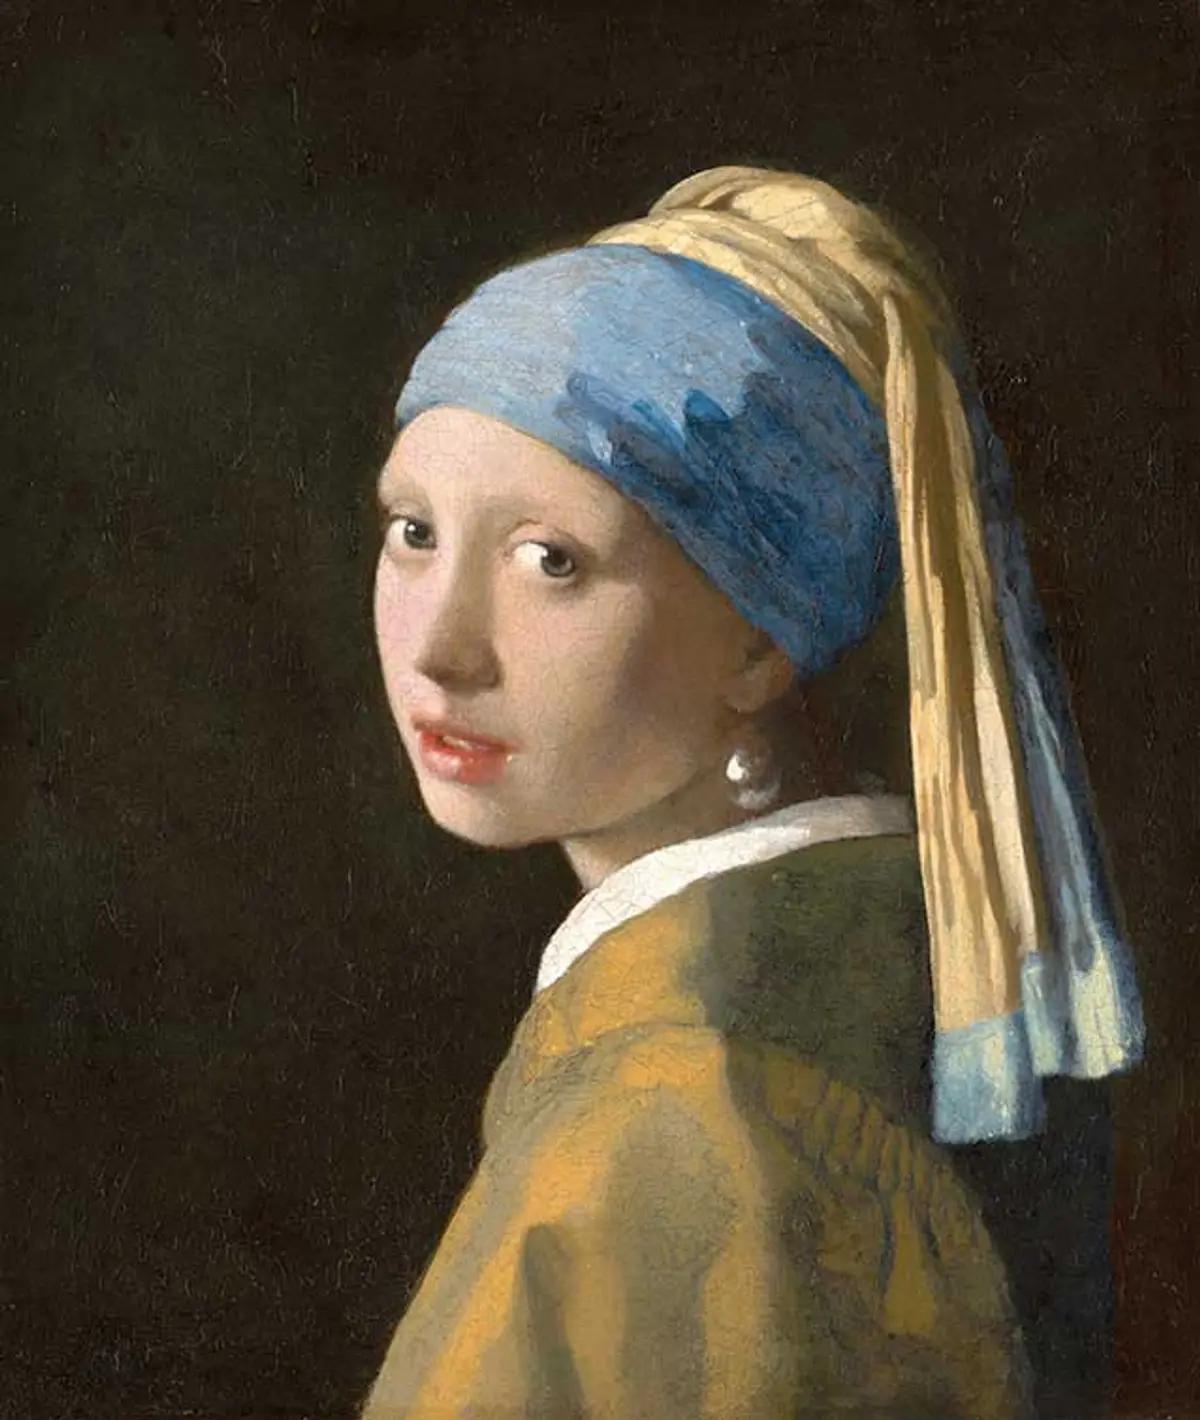 The Vermeer exhibition at the Rijksmuseum featuring Girl with a Pearl Earring (around 1665) was a highlight of 2023 Photo: © Margareta Svensson